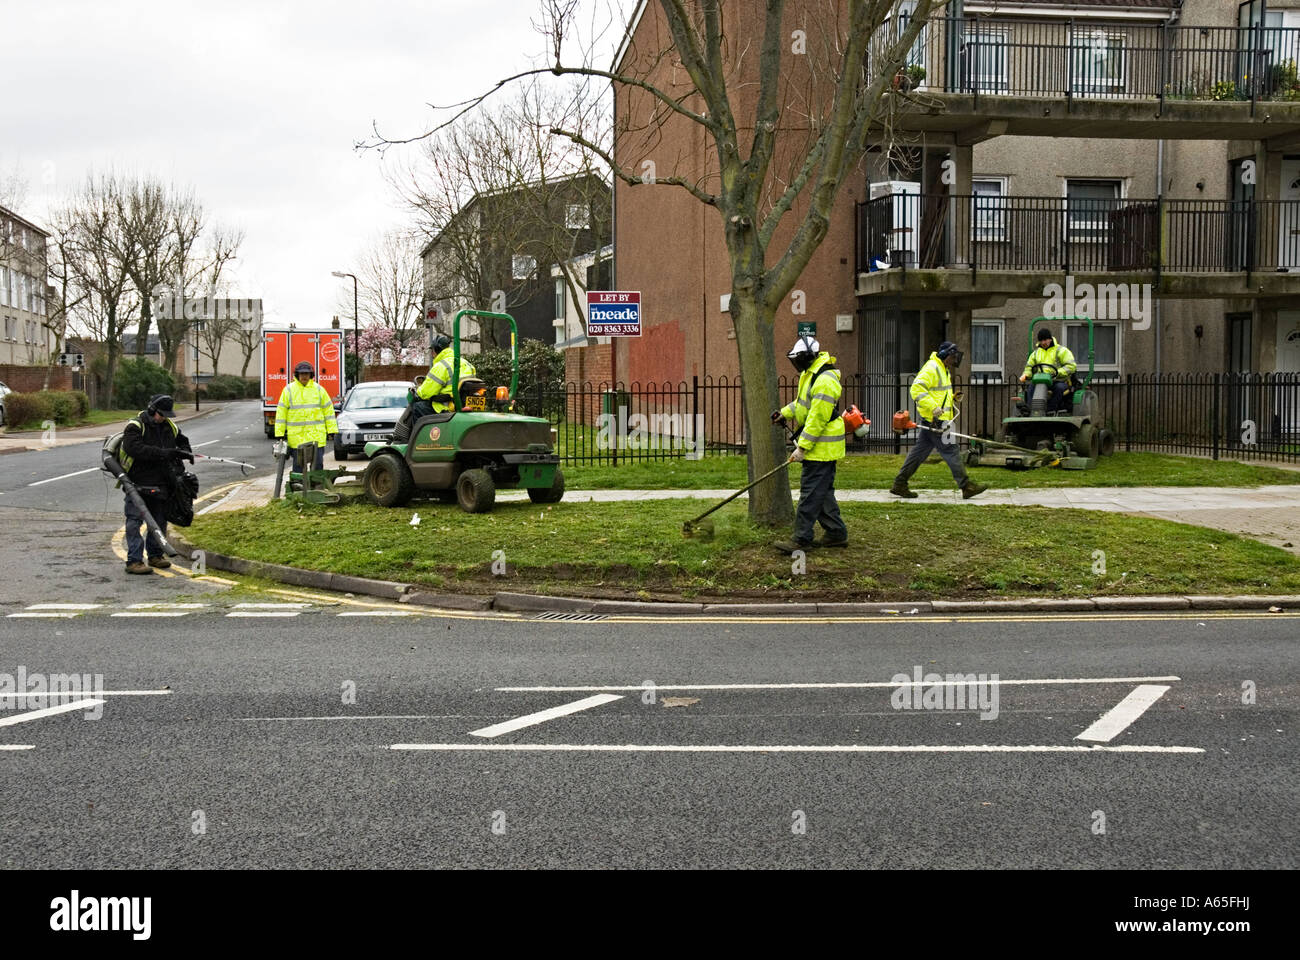 Council workers trimming verges using mechanical trimmers Stock Photo